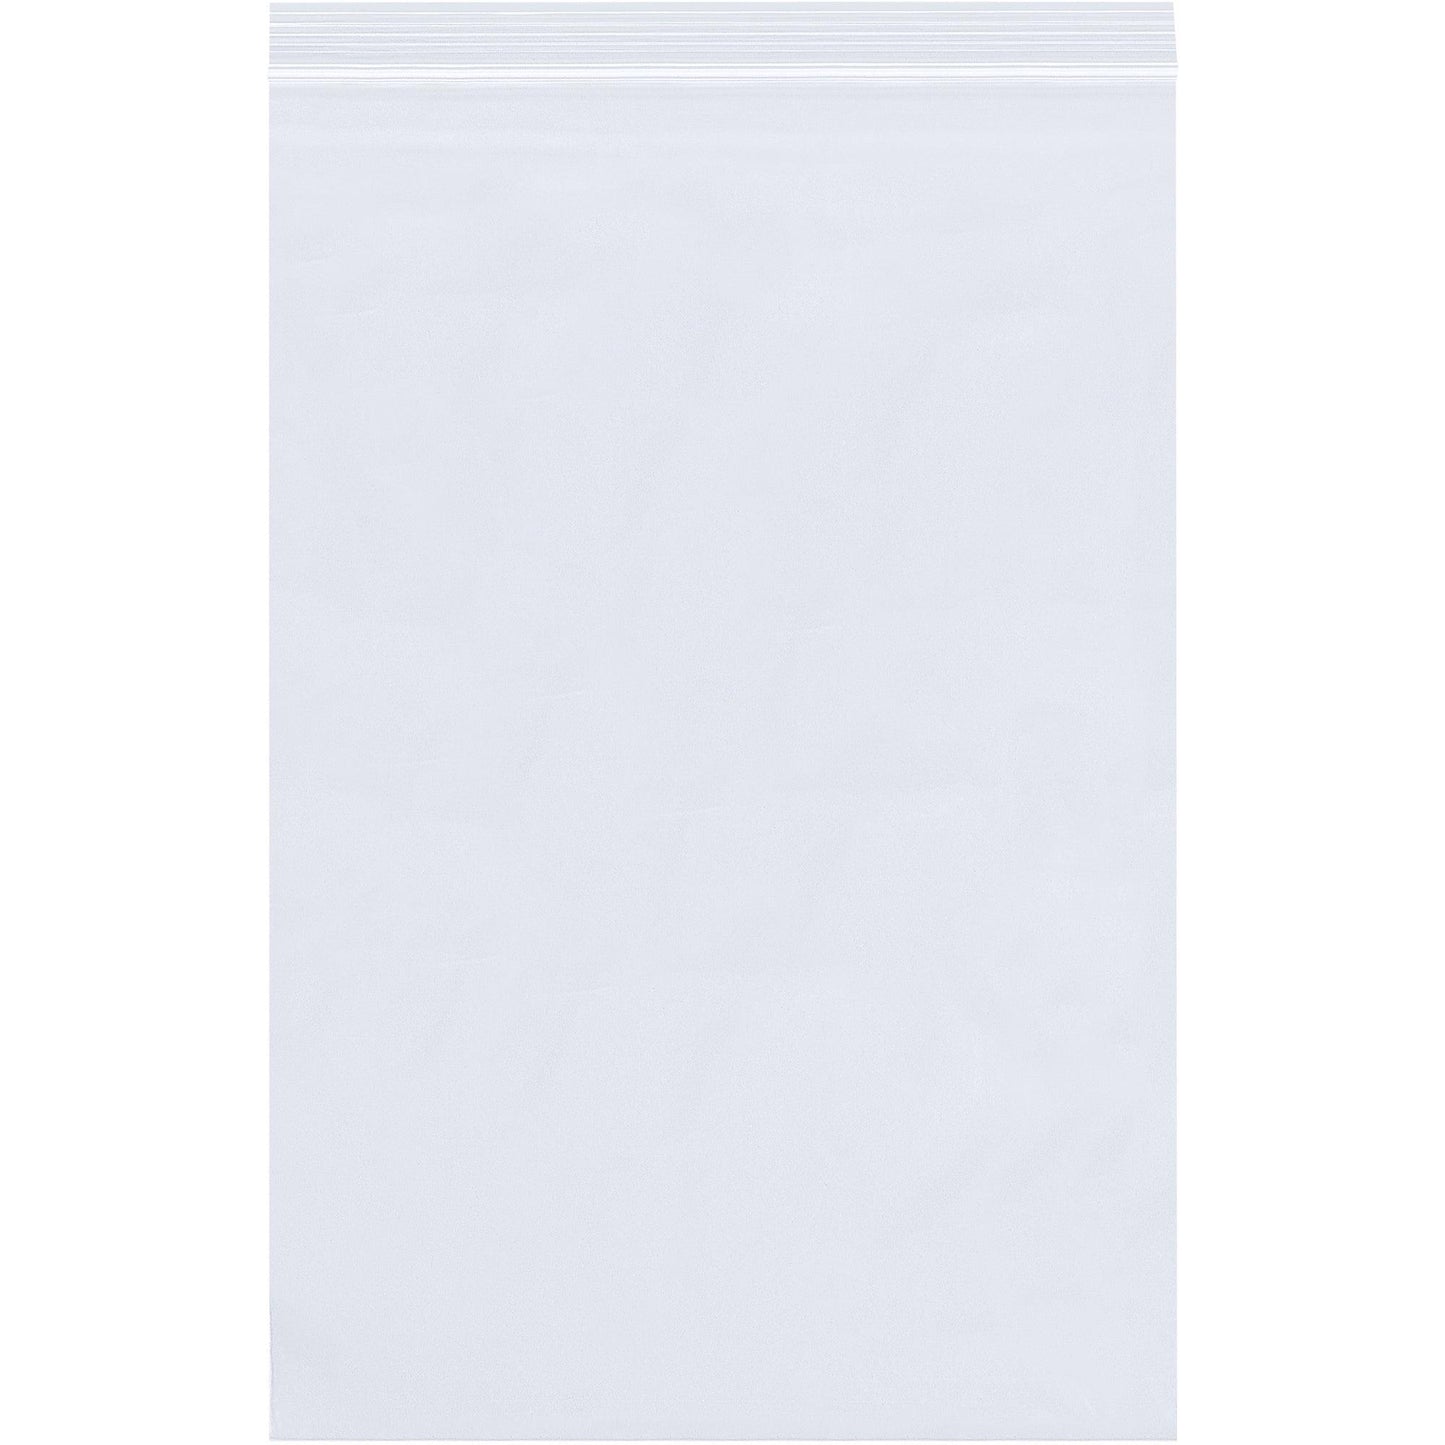 20 x 30" - 2 Mil Reclosable Poly Bags - PB3651